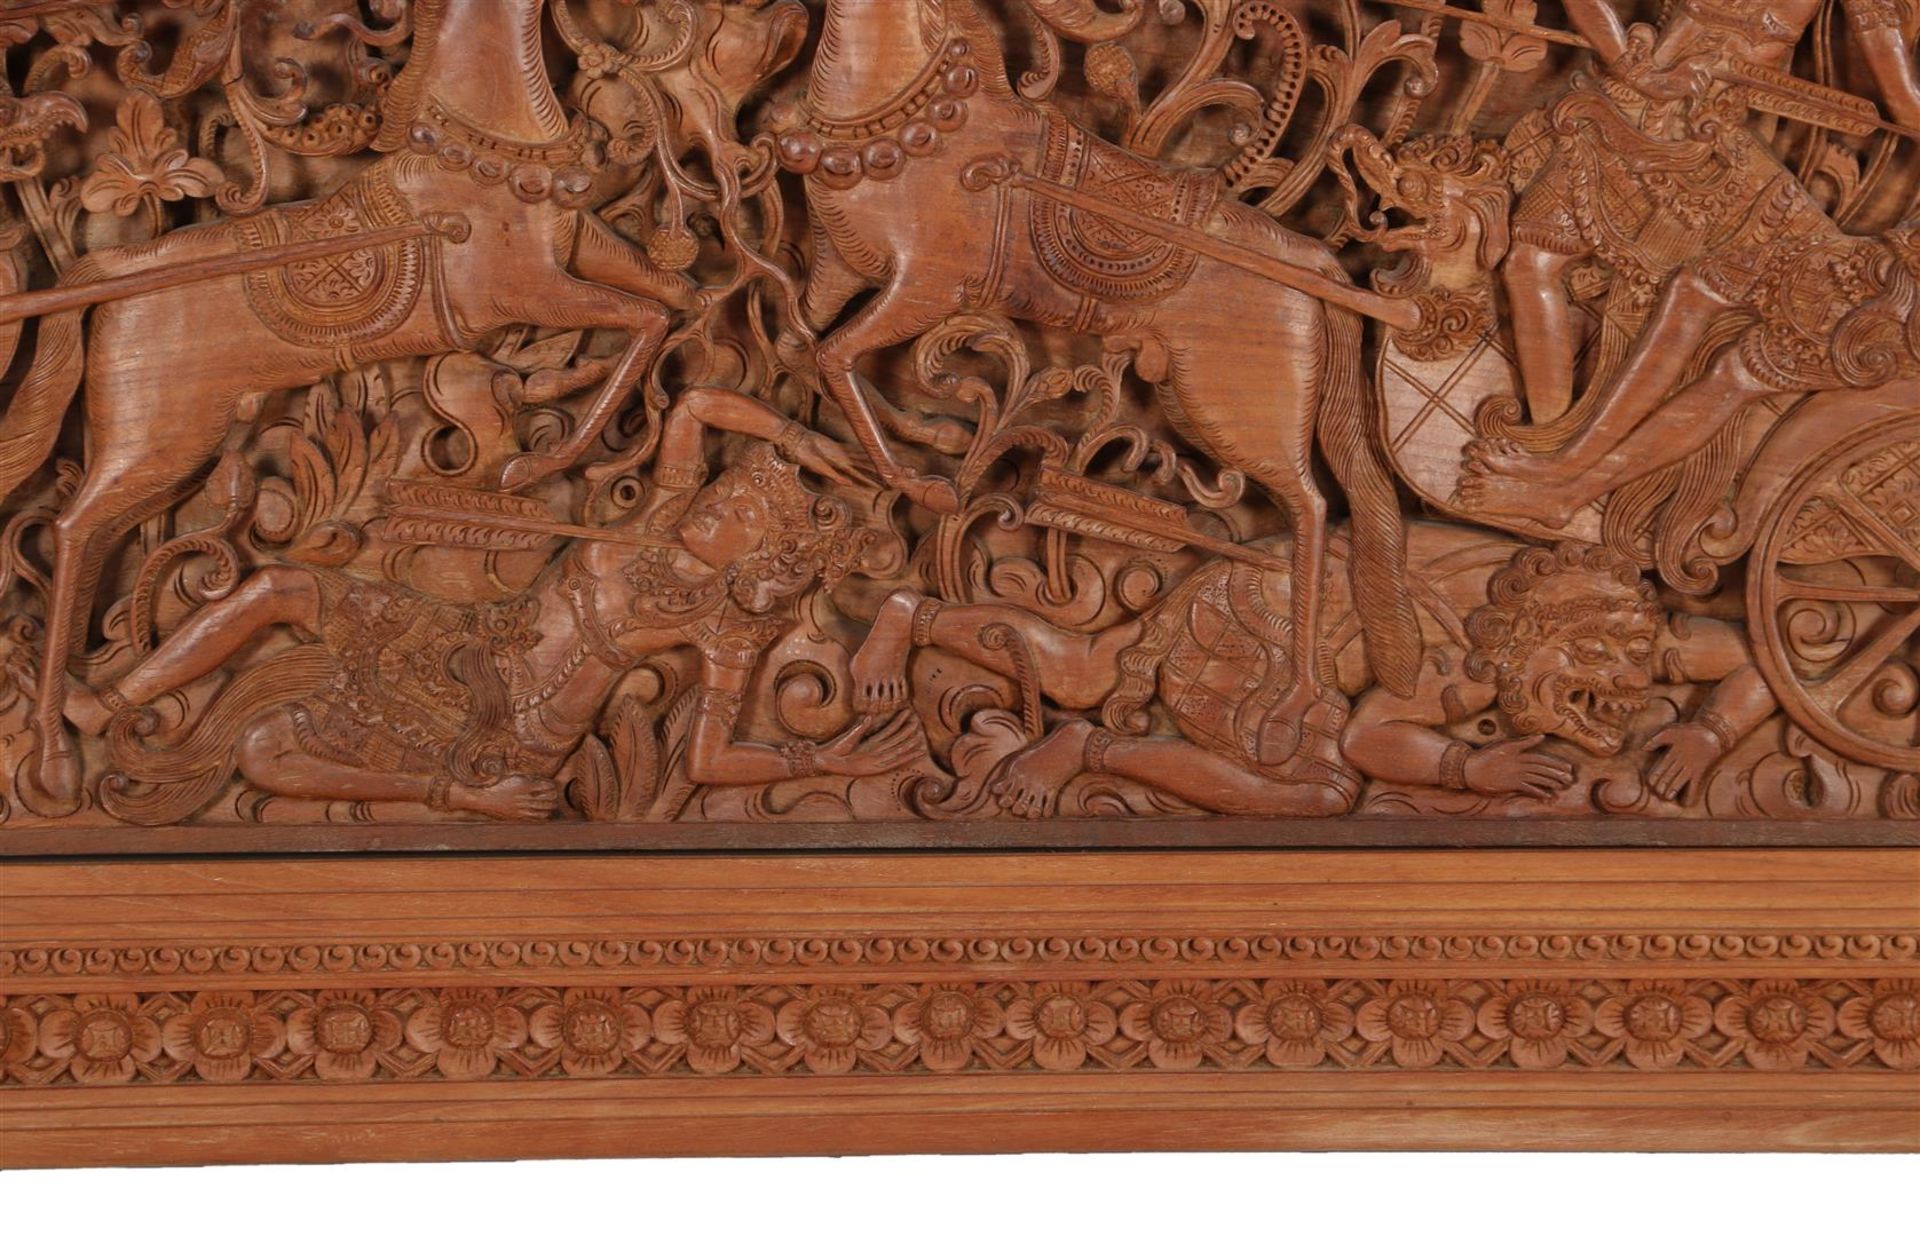 Wooden ornate wall decoration - Image 3 of 6